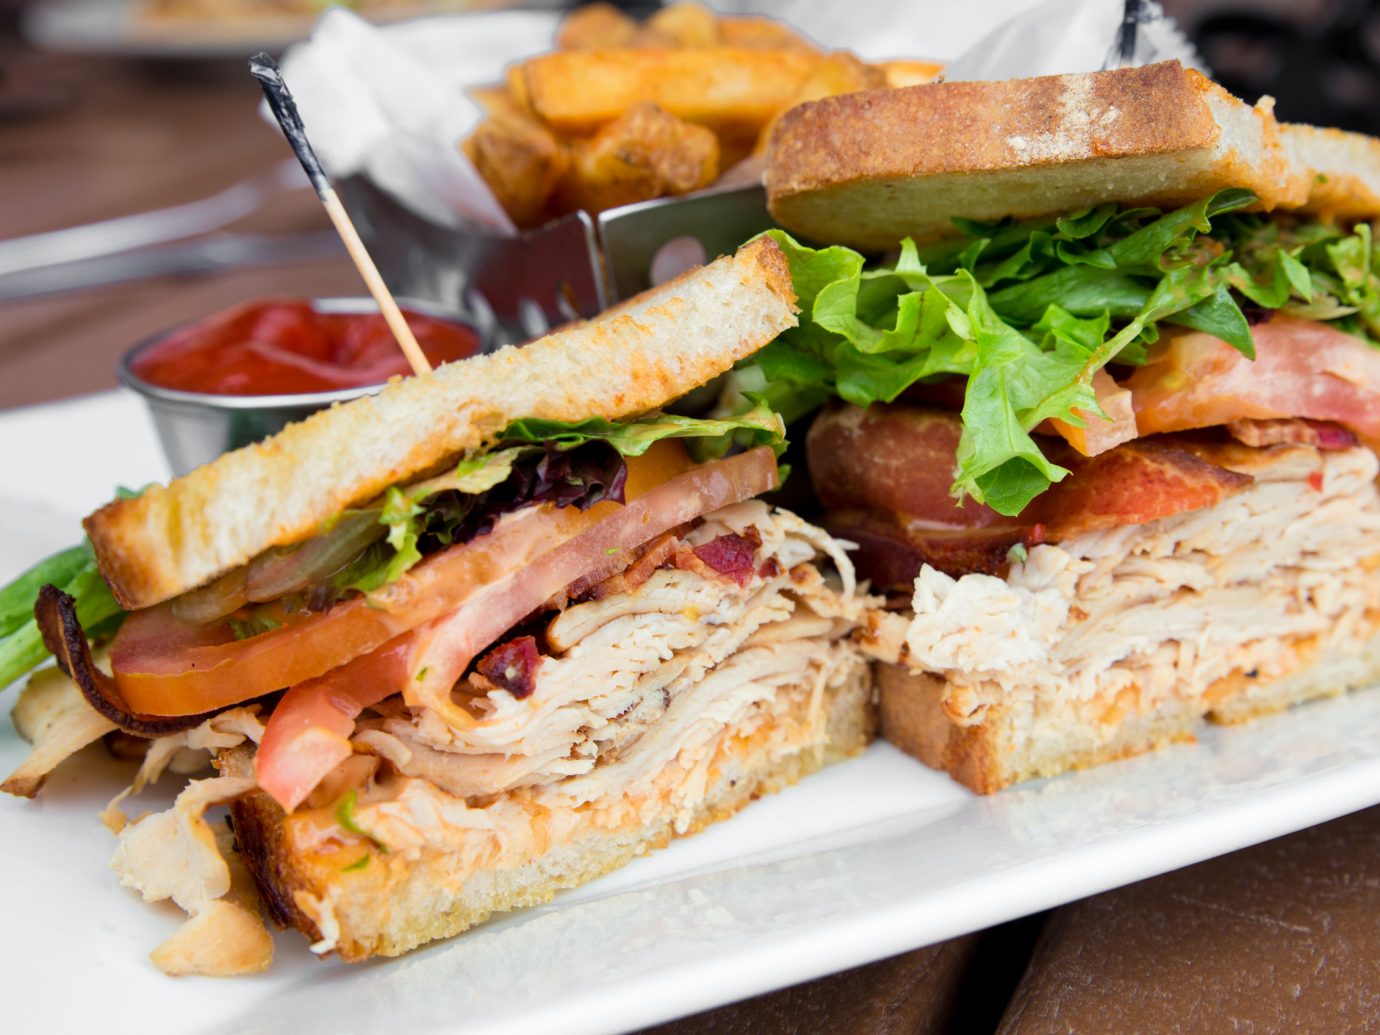 Delicious turkey club sandwich on toast with bacon, lettuce and tomato.